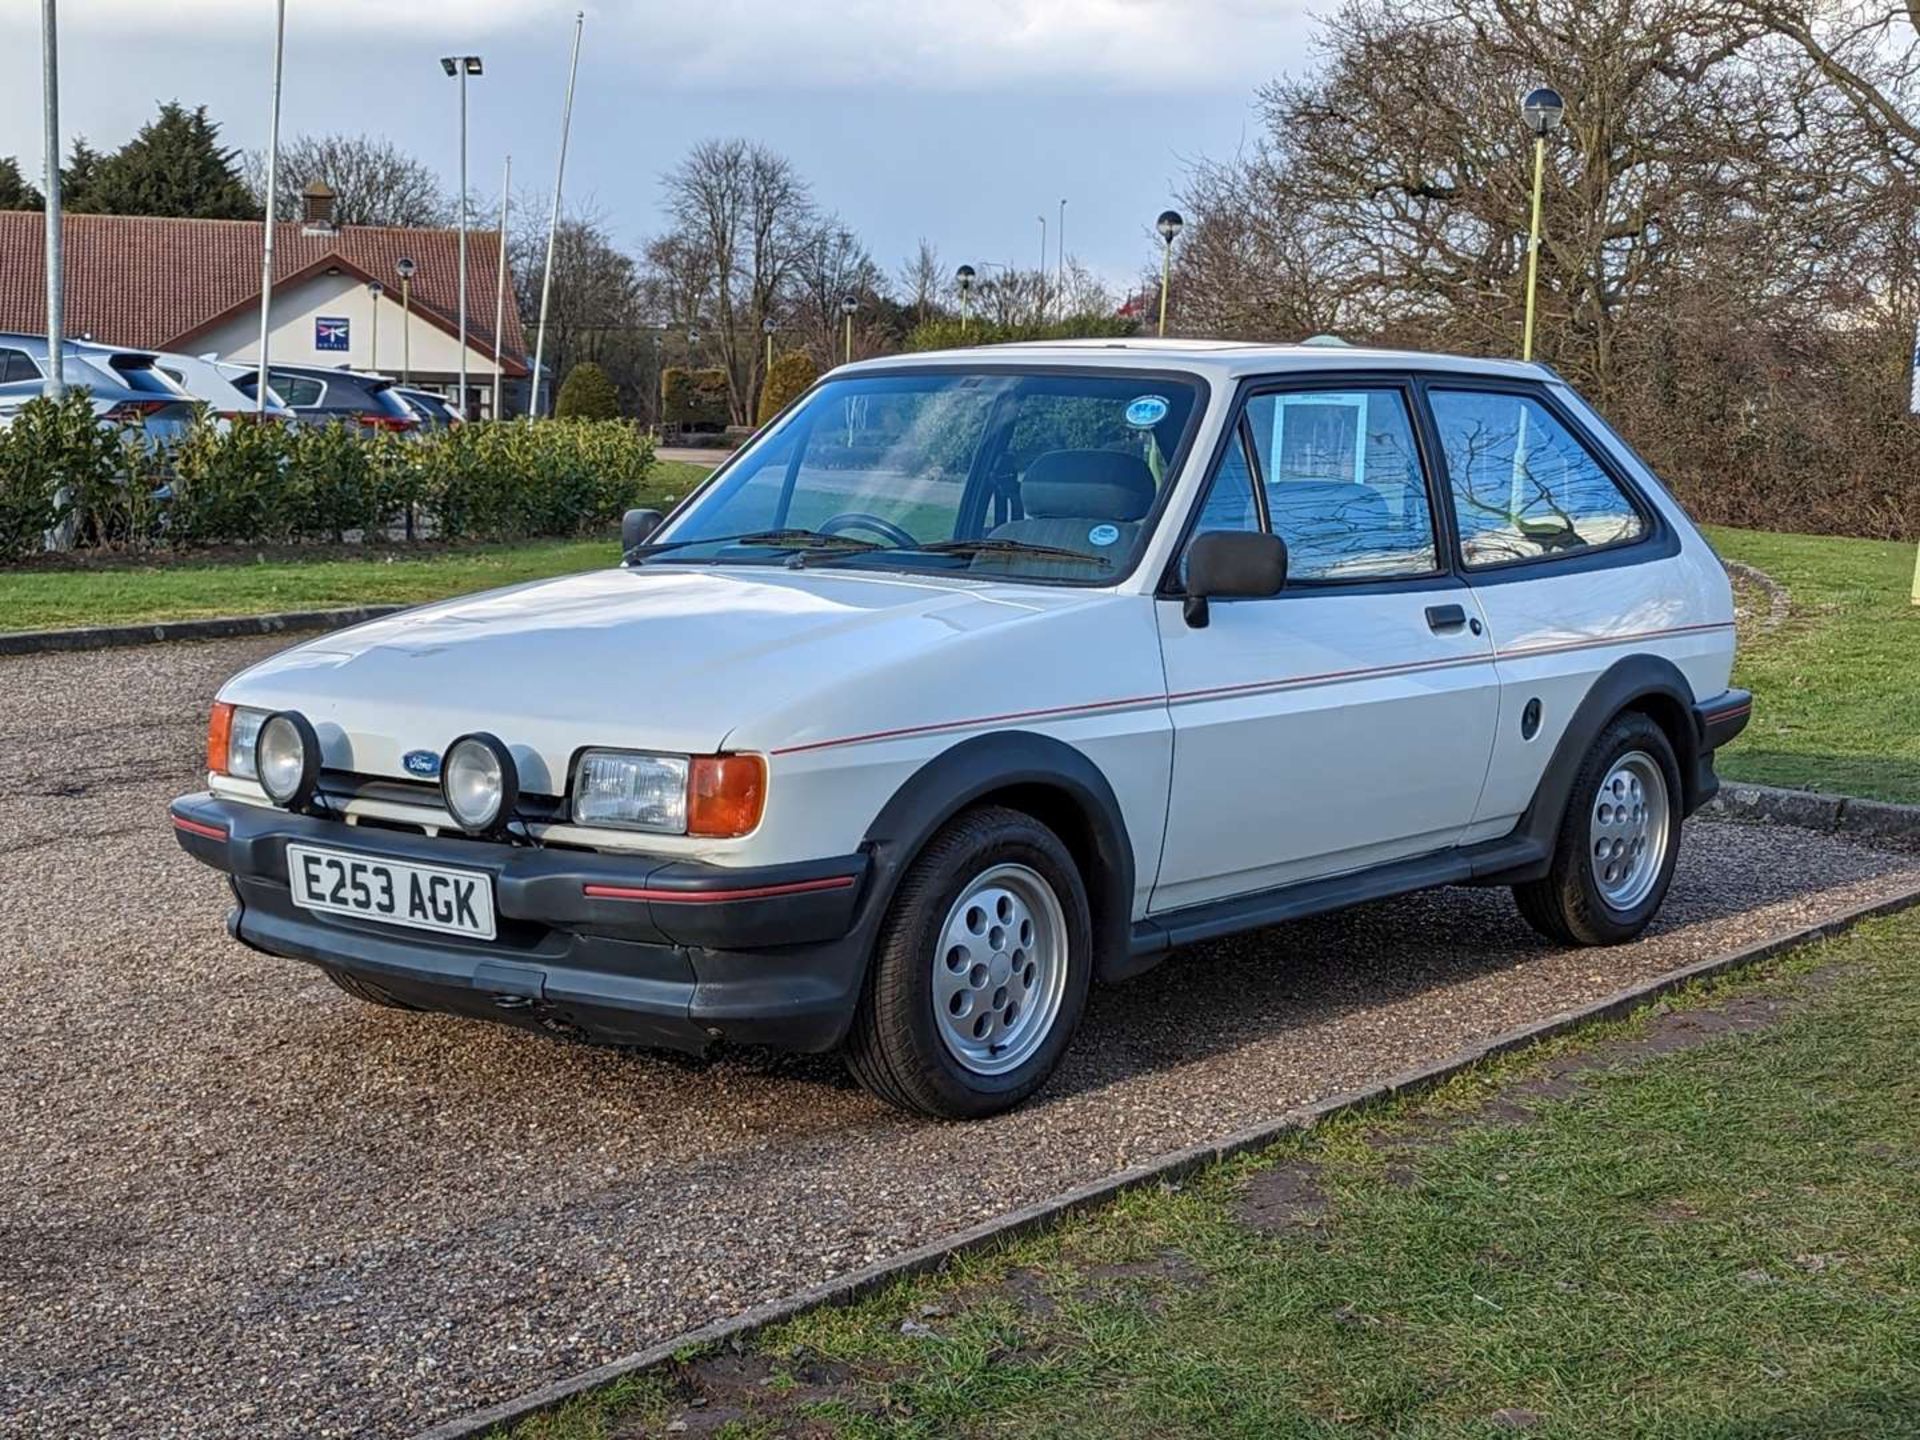 1988 FORD FIESTA XR2 - Image 3 of 30